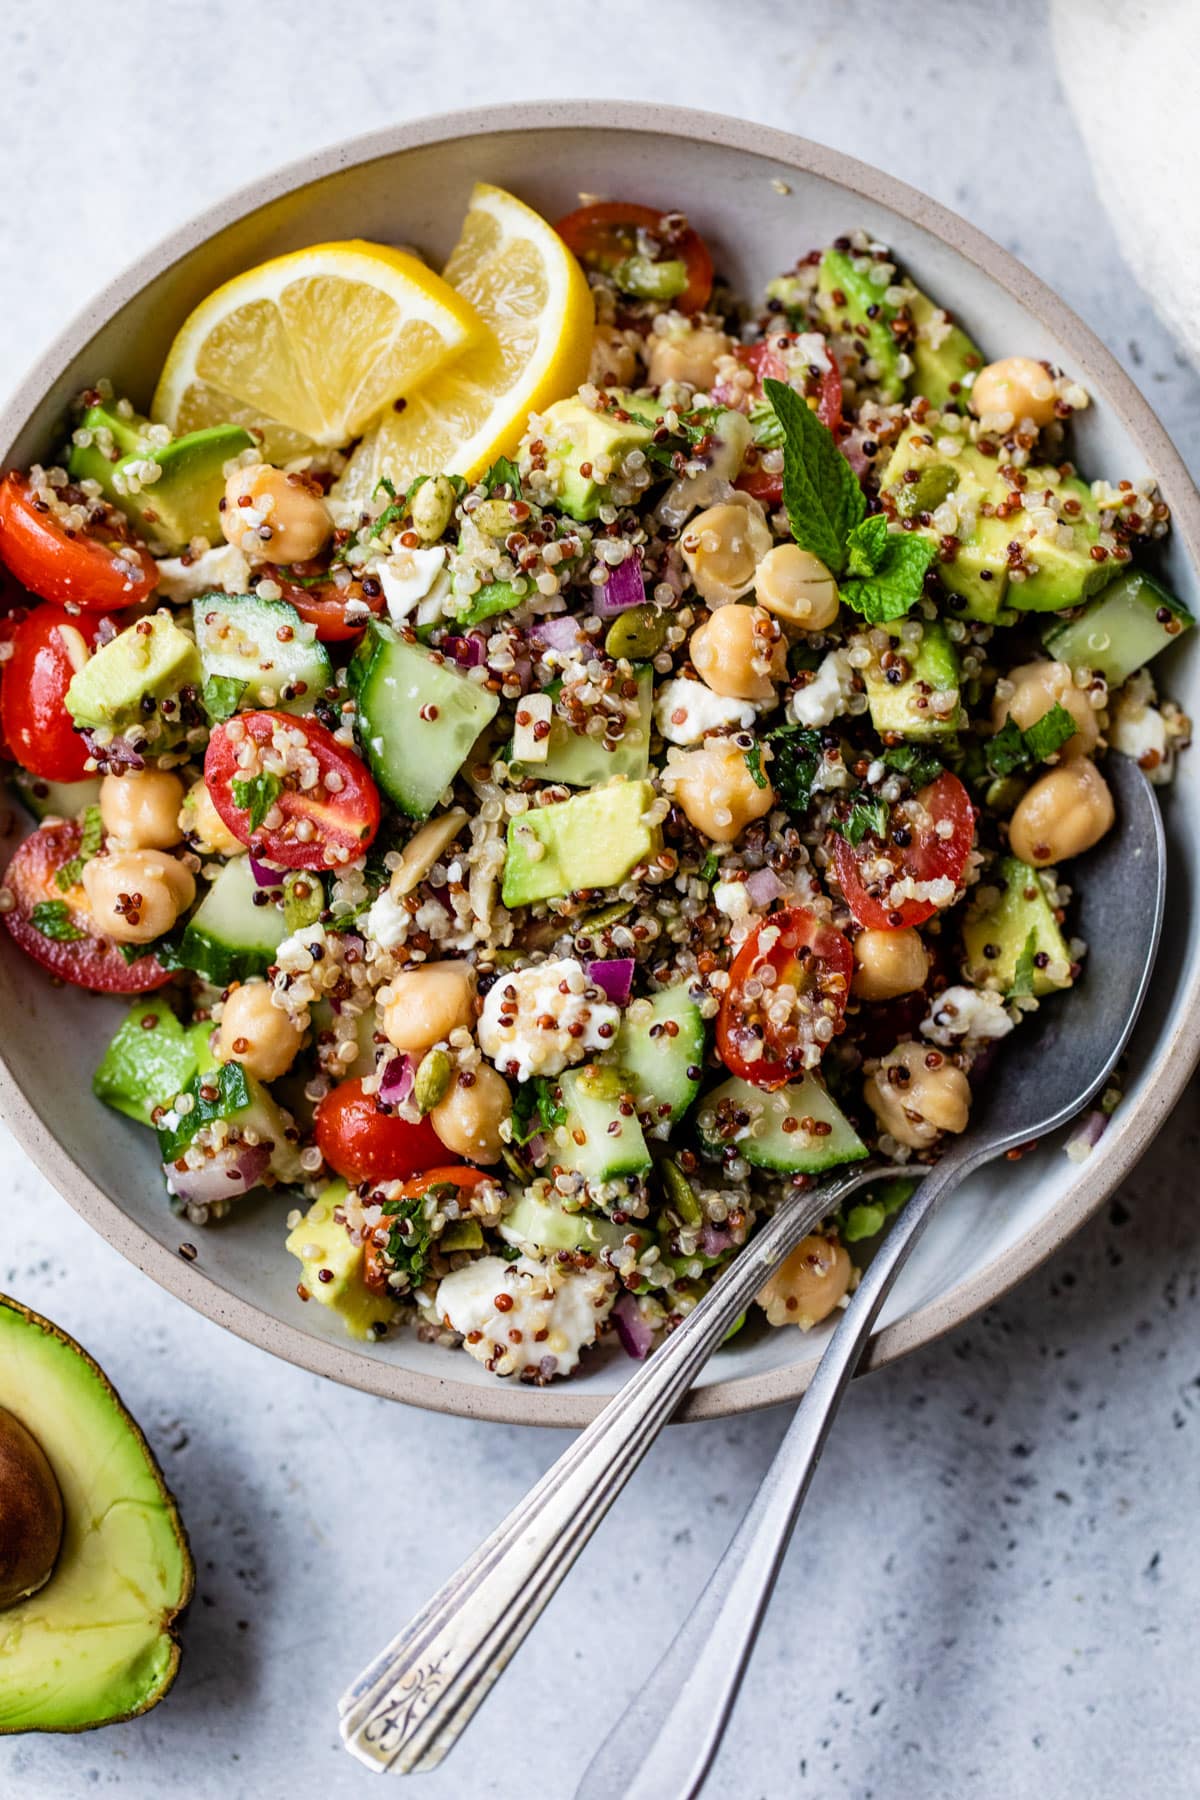 bowl with quinoa, feta cheese, cucumber, and other vegetables inside and with a spoon